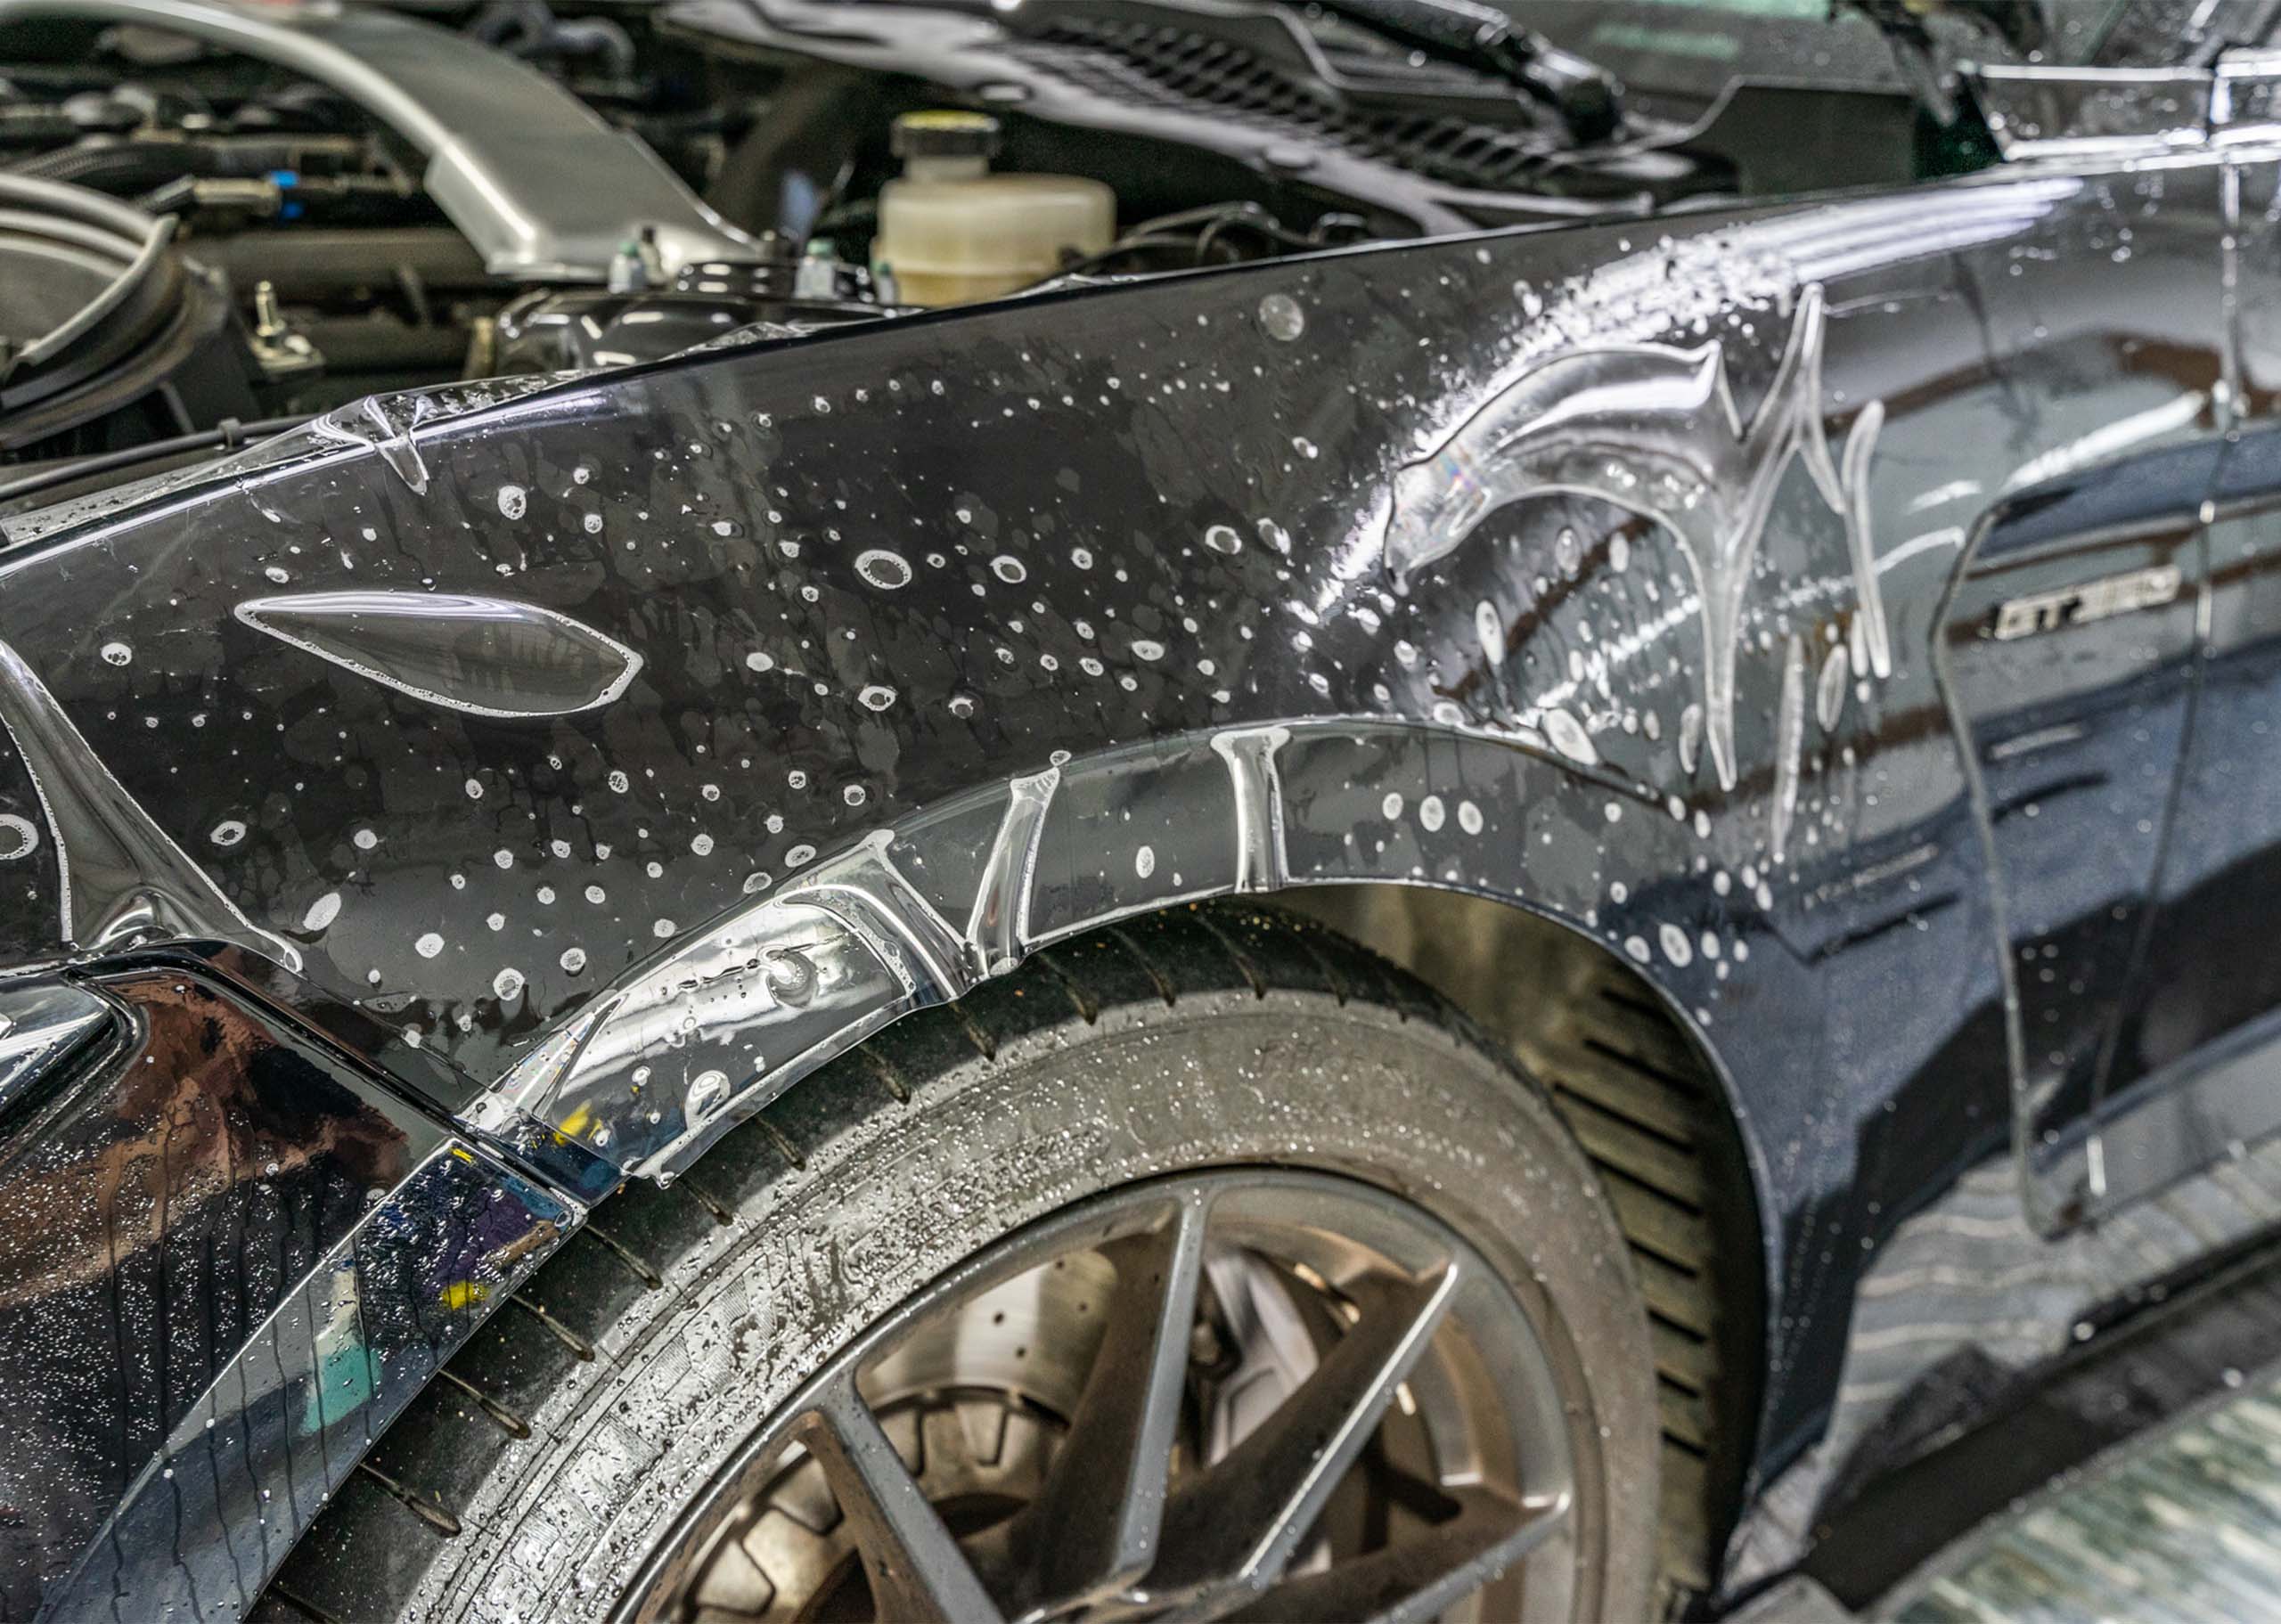 Is XPEL Paint Protection Film Worth It?